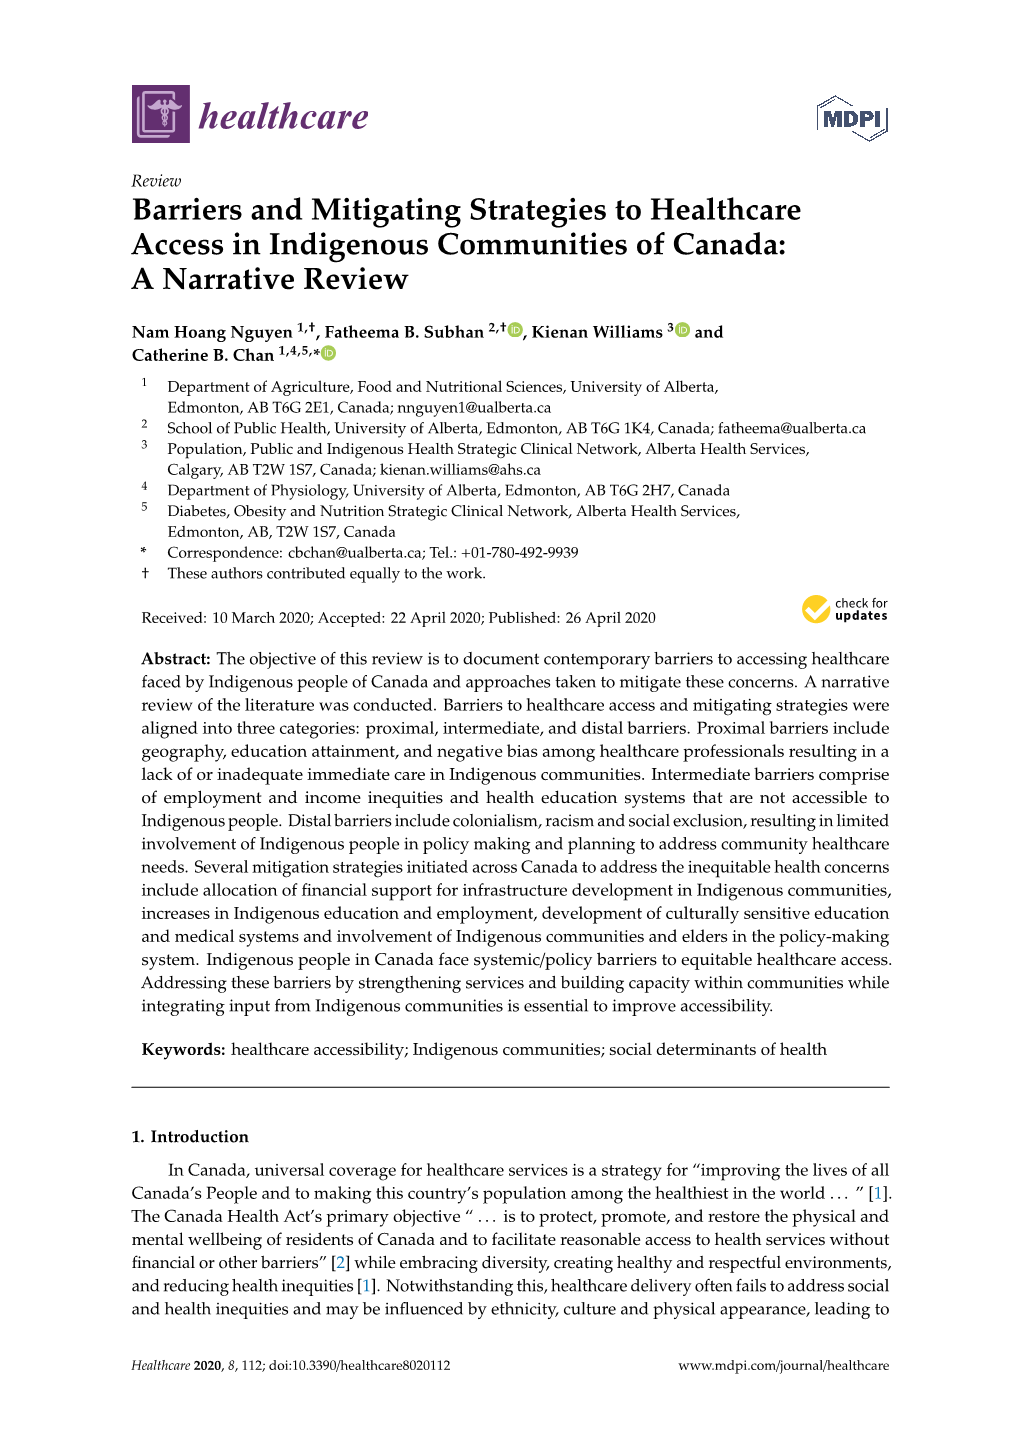 Barriers and Mitigating Strategies to Healthcare Access in Indigenous Communities of Canada: a Narrative Review